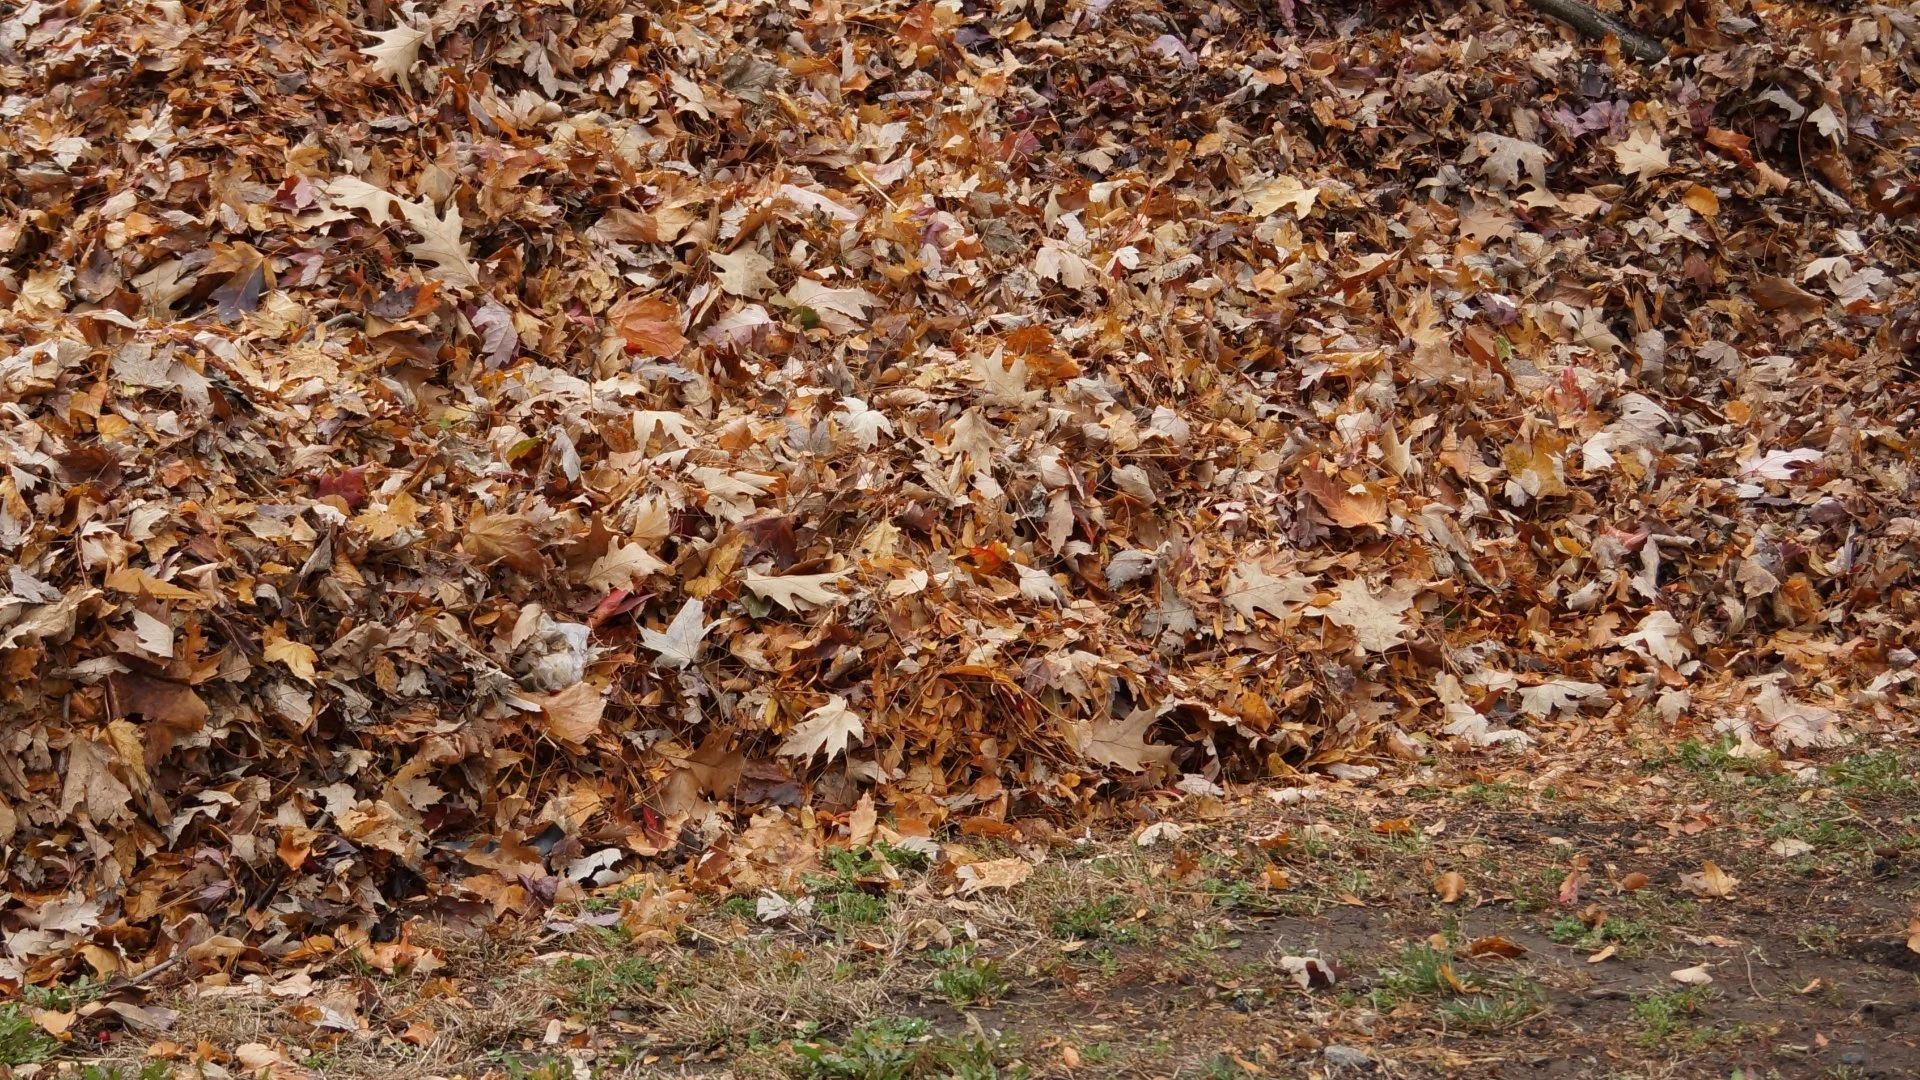 Is It Bad if I Leave Leaves on My Lawn Over the Winter Season?